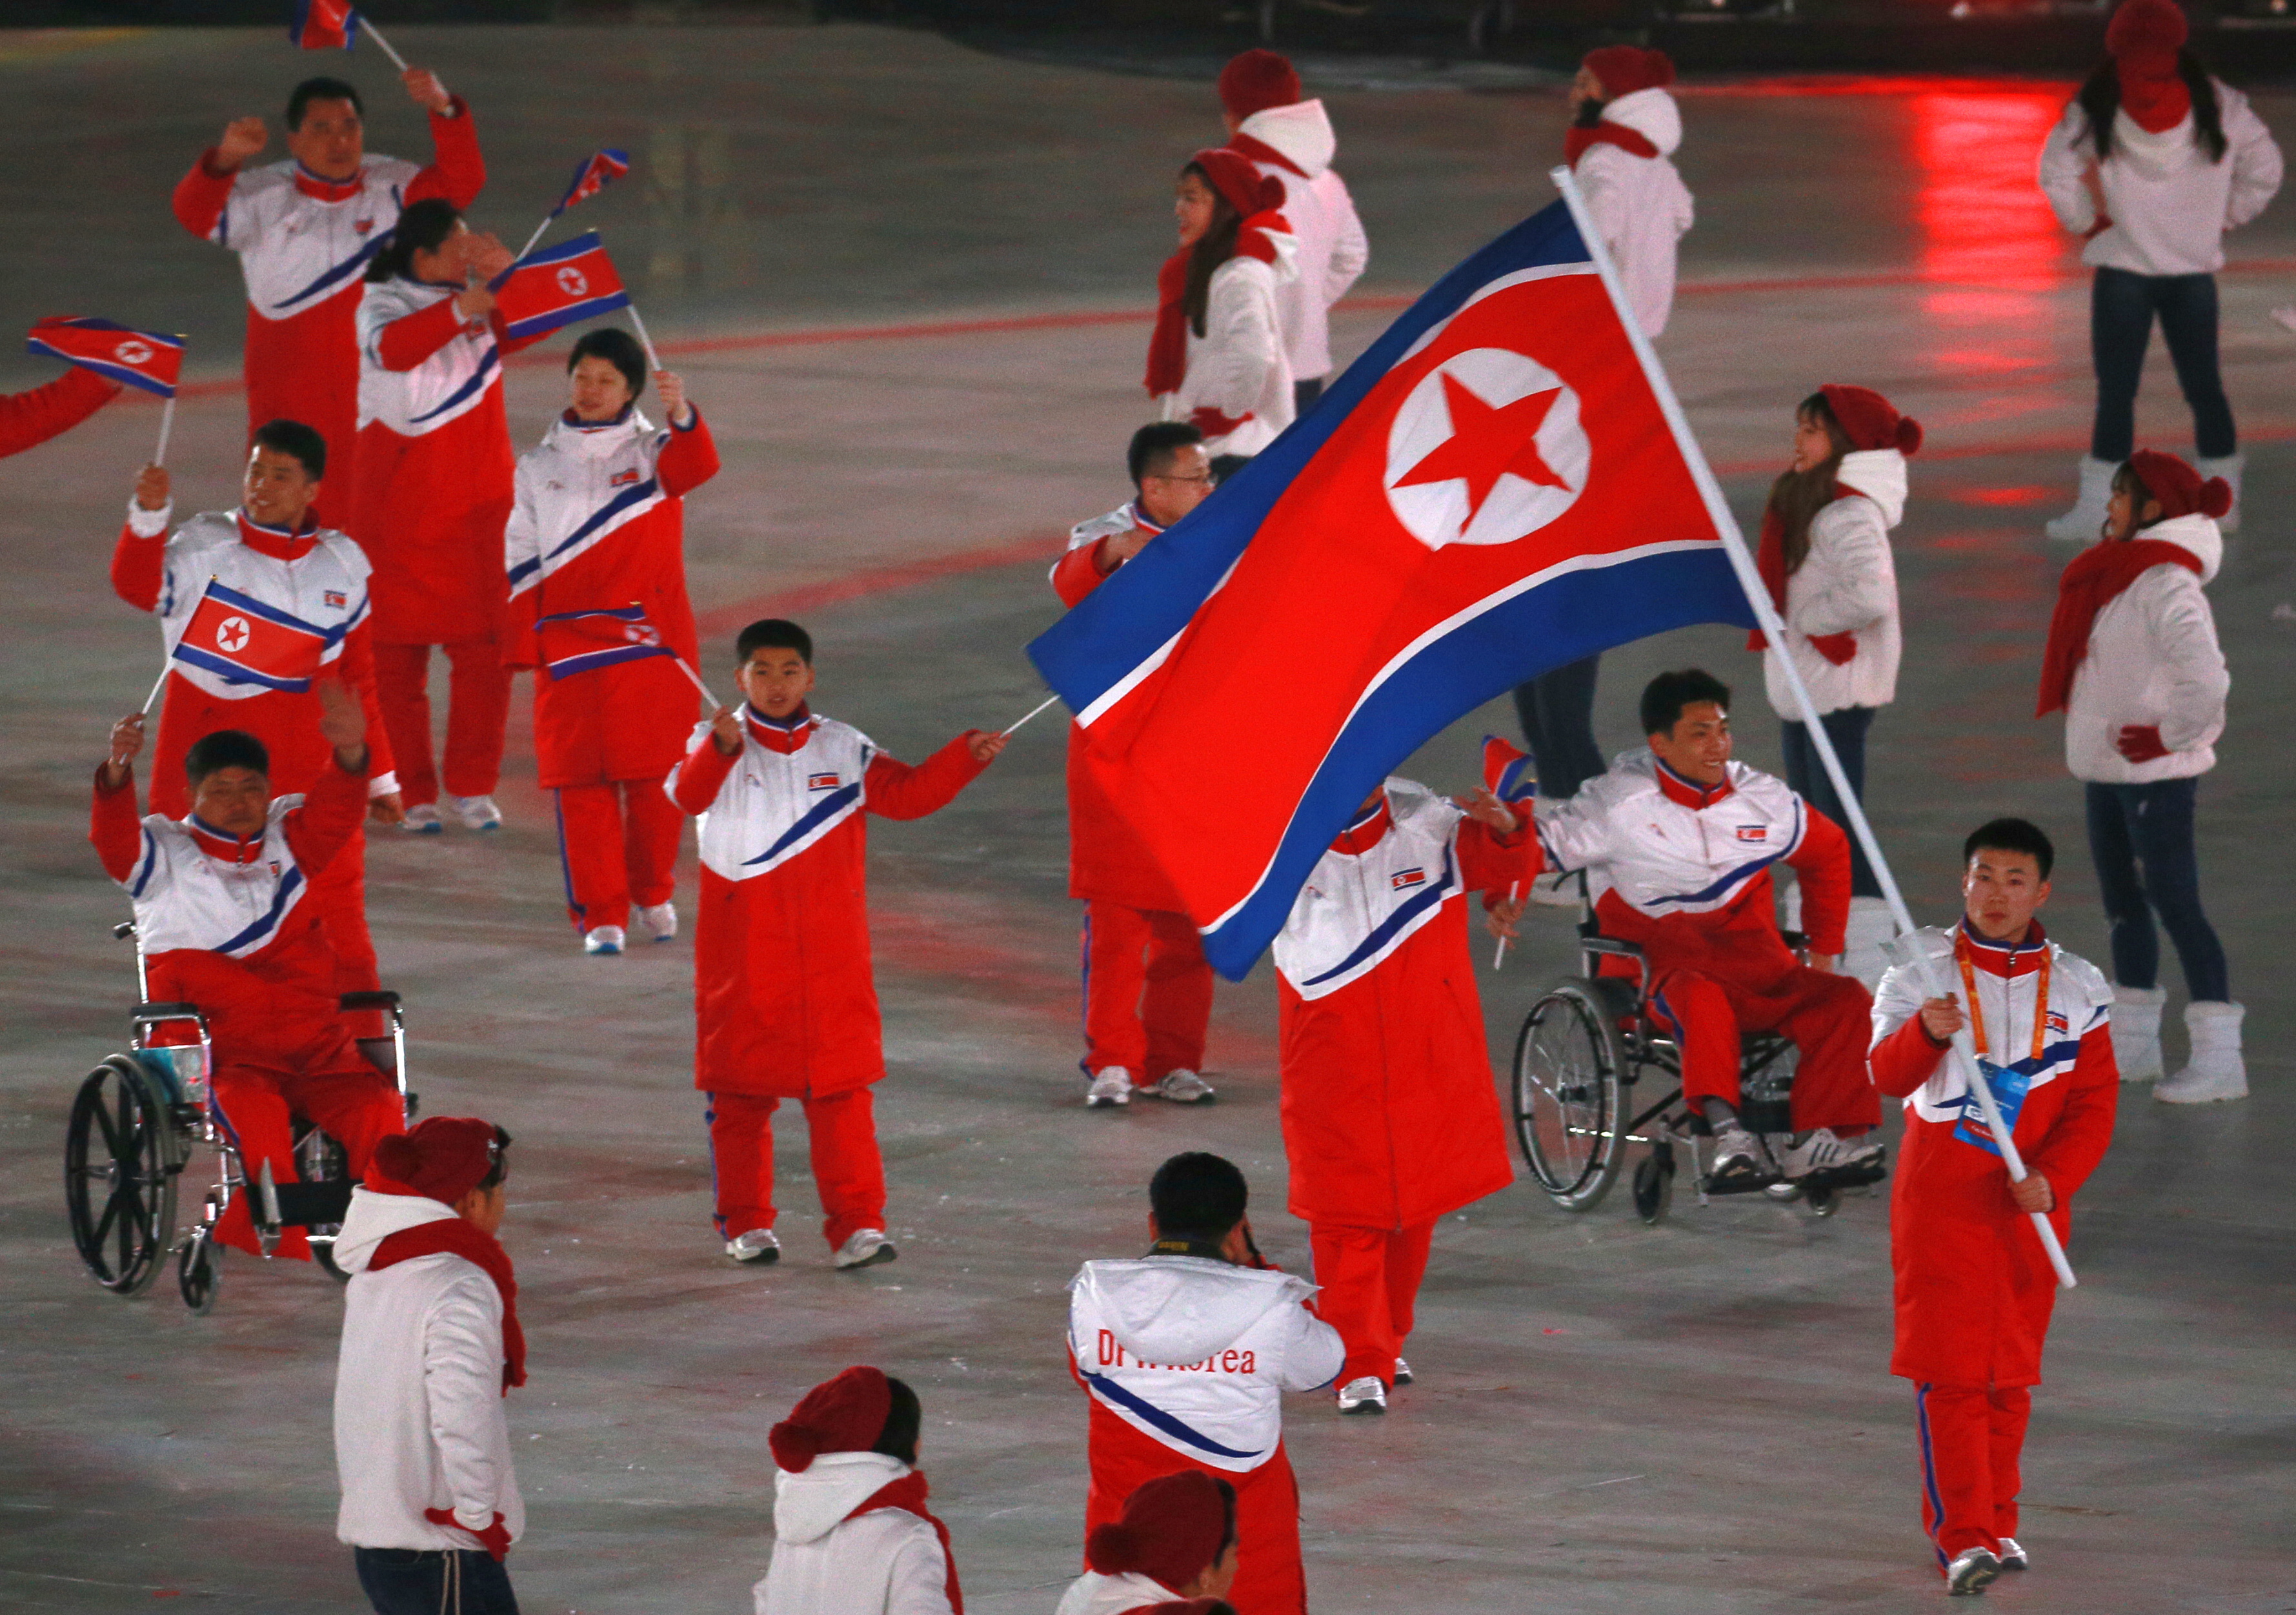 Members of the North Korean national team during the parade of athletes at the Opening Ceremony of the 2018 Winter Paralympic Games at PyeongChang Olympic Stadium (Vladimir Smirnov –Vladimir Smirnov/TASS)